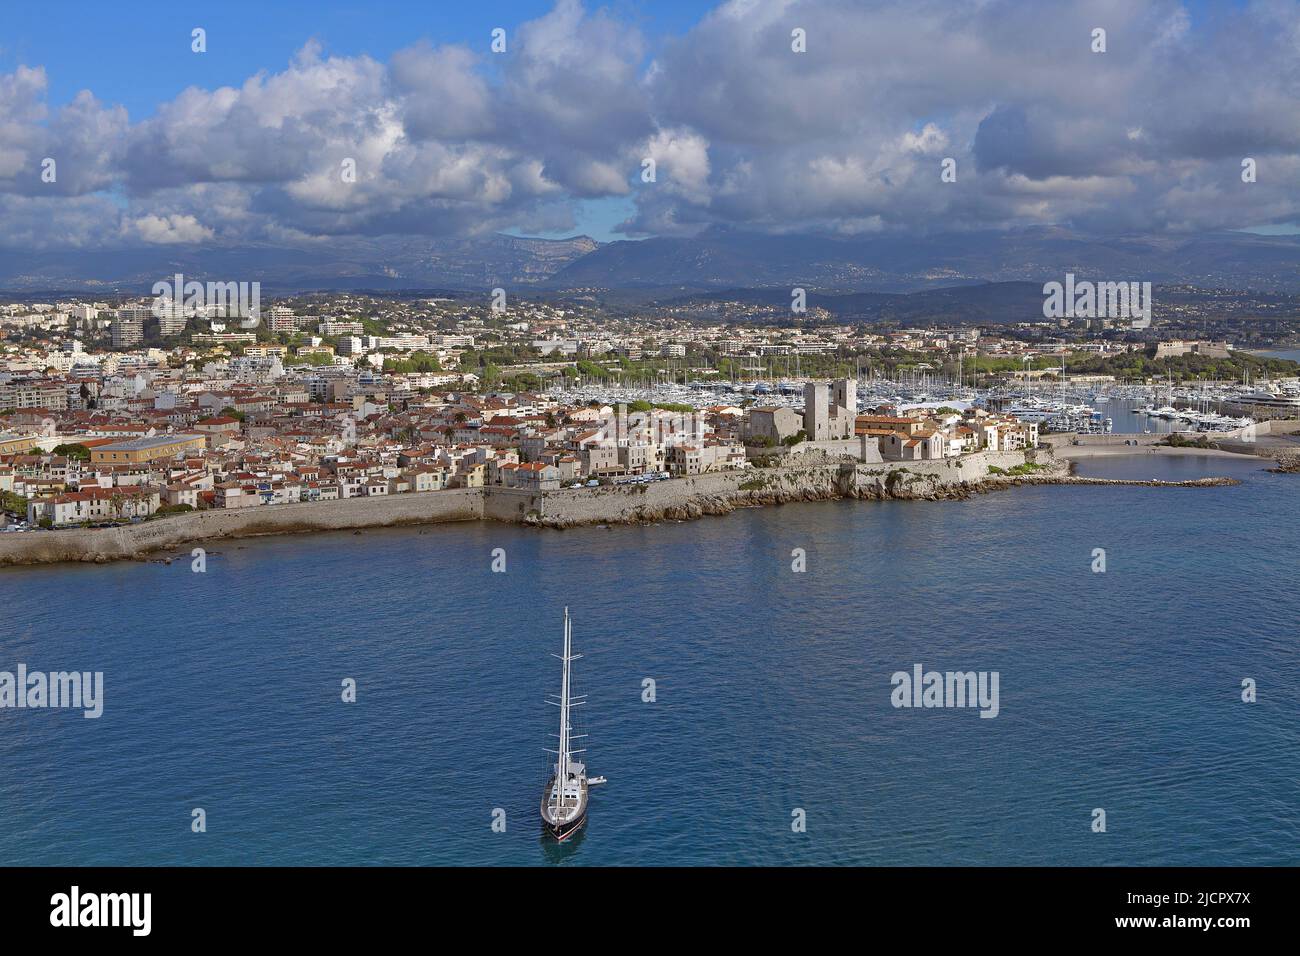 France, Alpes-Maritimes, Antibes, seaside town and fortified town of Antibes, seen from the sea, with boats, (aerial photo) Stock Photo